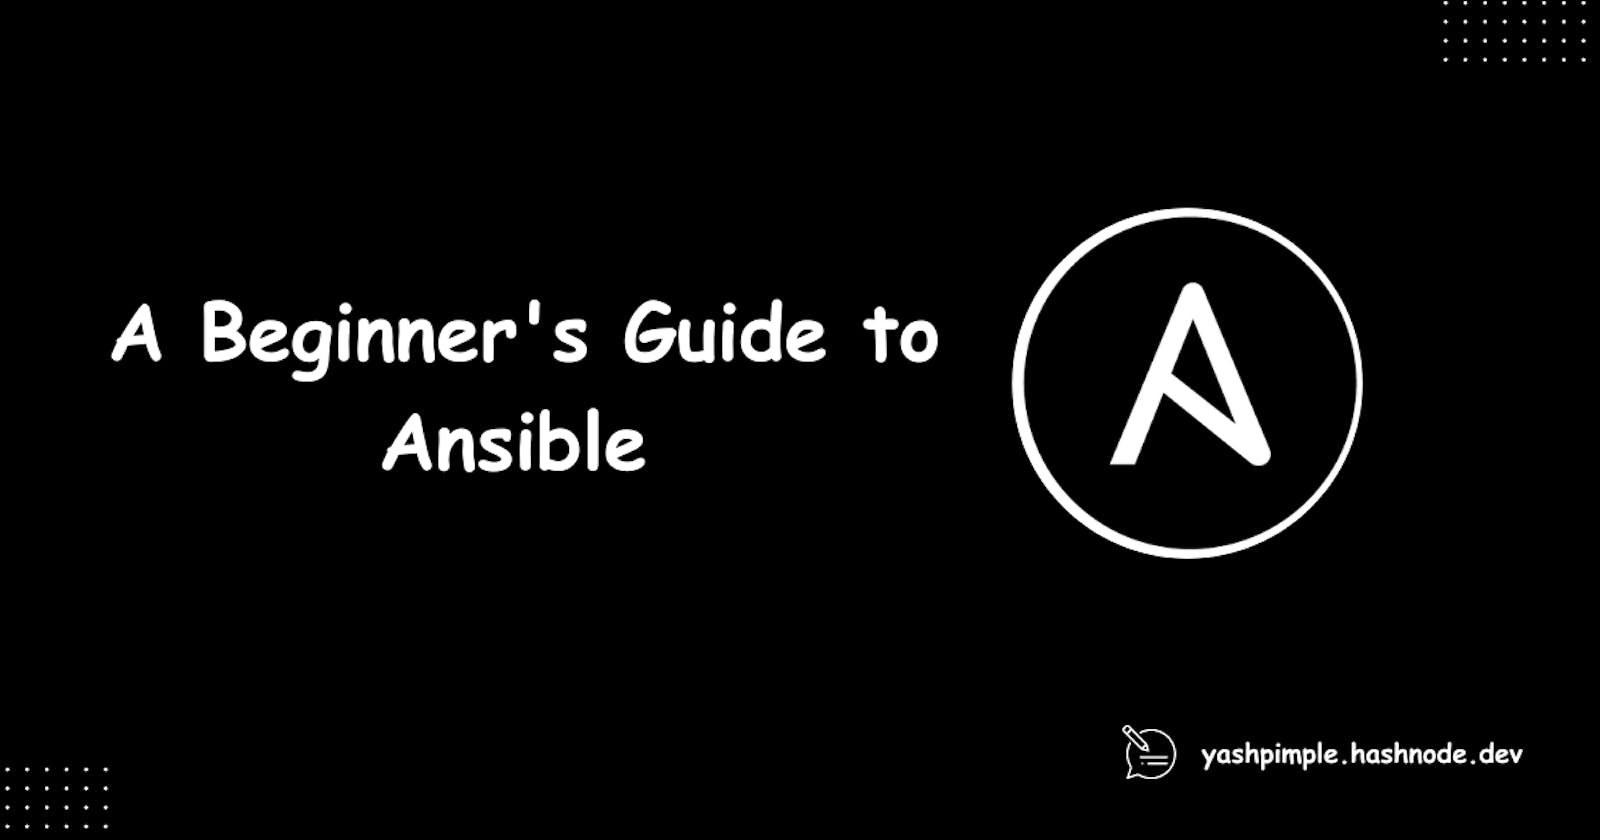 What is Ansible? A Beginner's Guide